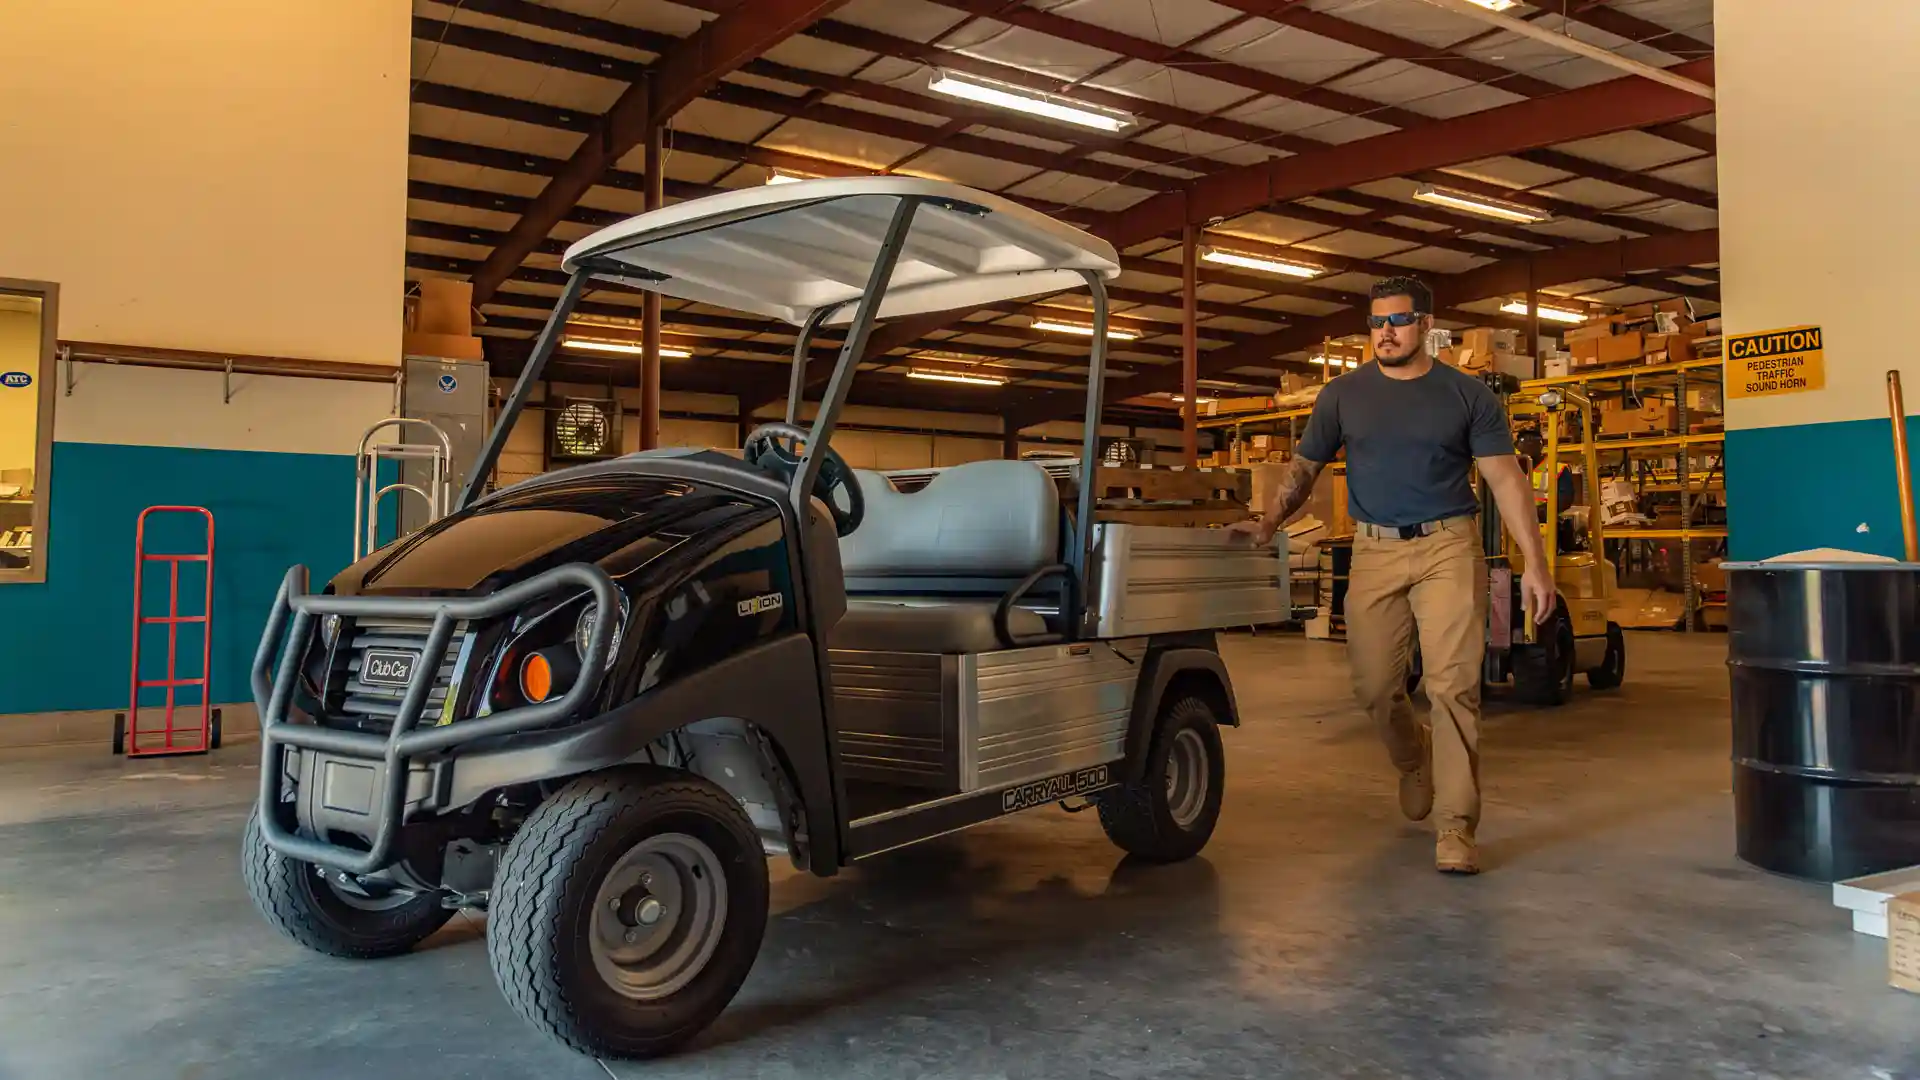 Carryall 500 gas or electric utility vehicle at warehouse